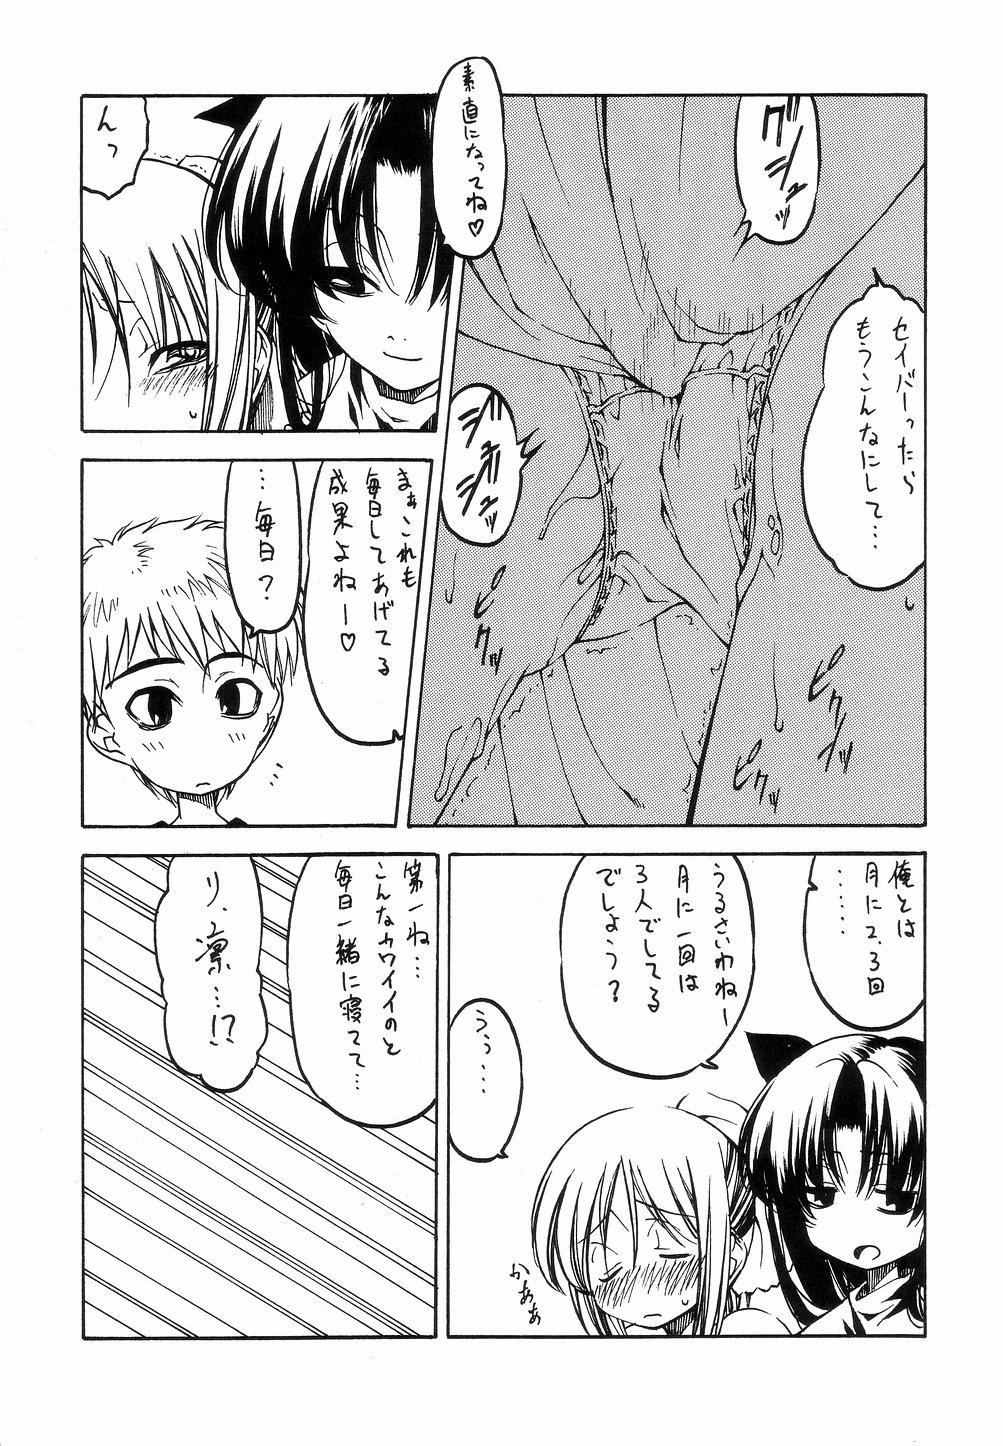 Tiny Titties Ou no Kigae - Fate stay night Work - Page 6